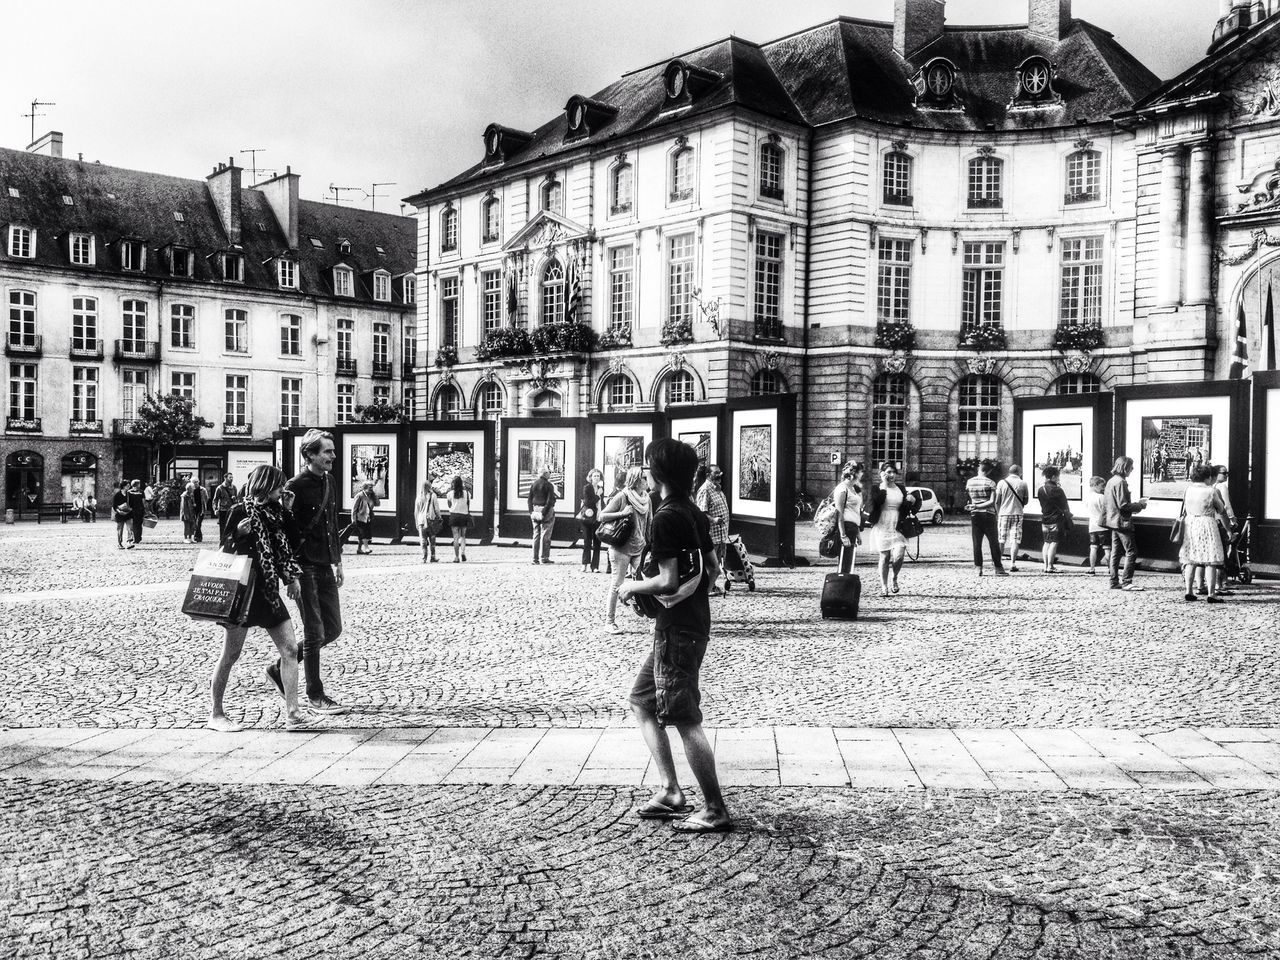 building exterior, architecture, built structure, large group of people, street, city, person, lifestyles, walking, men, city life, leisure activity, cobblestone, mixed age range, city street, building, town square, outdoors, day